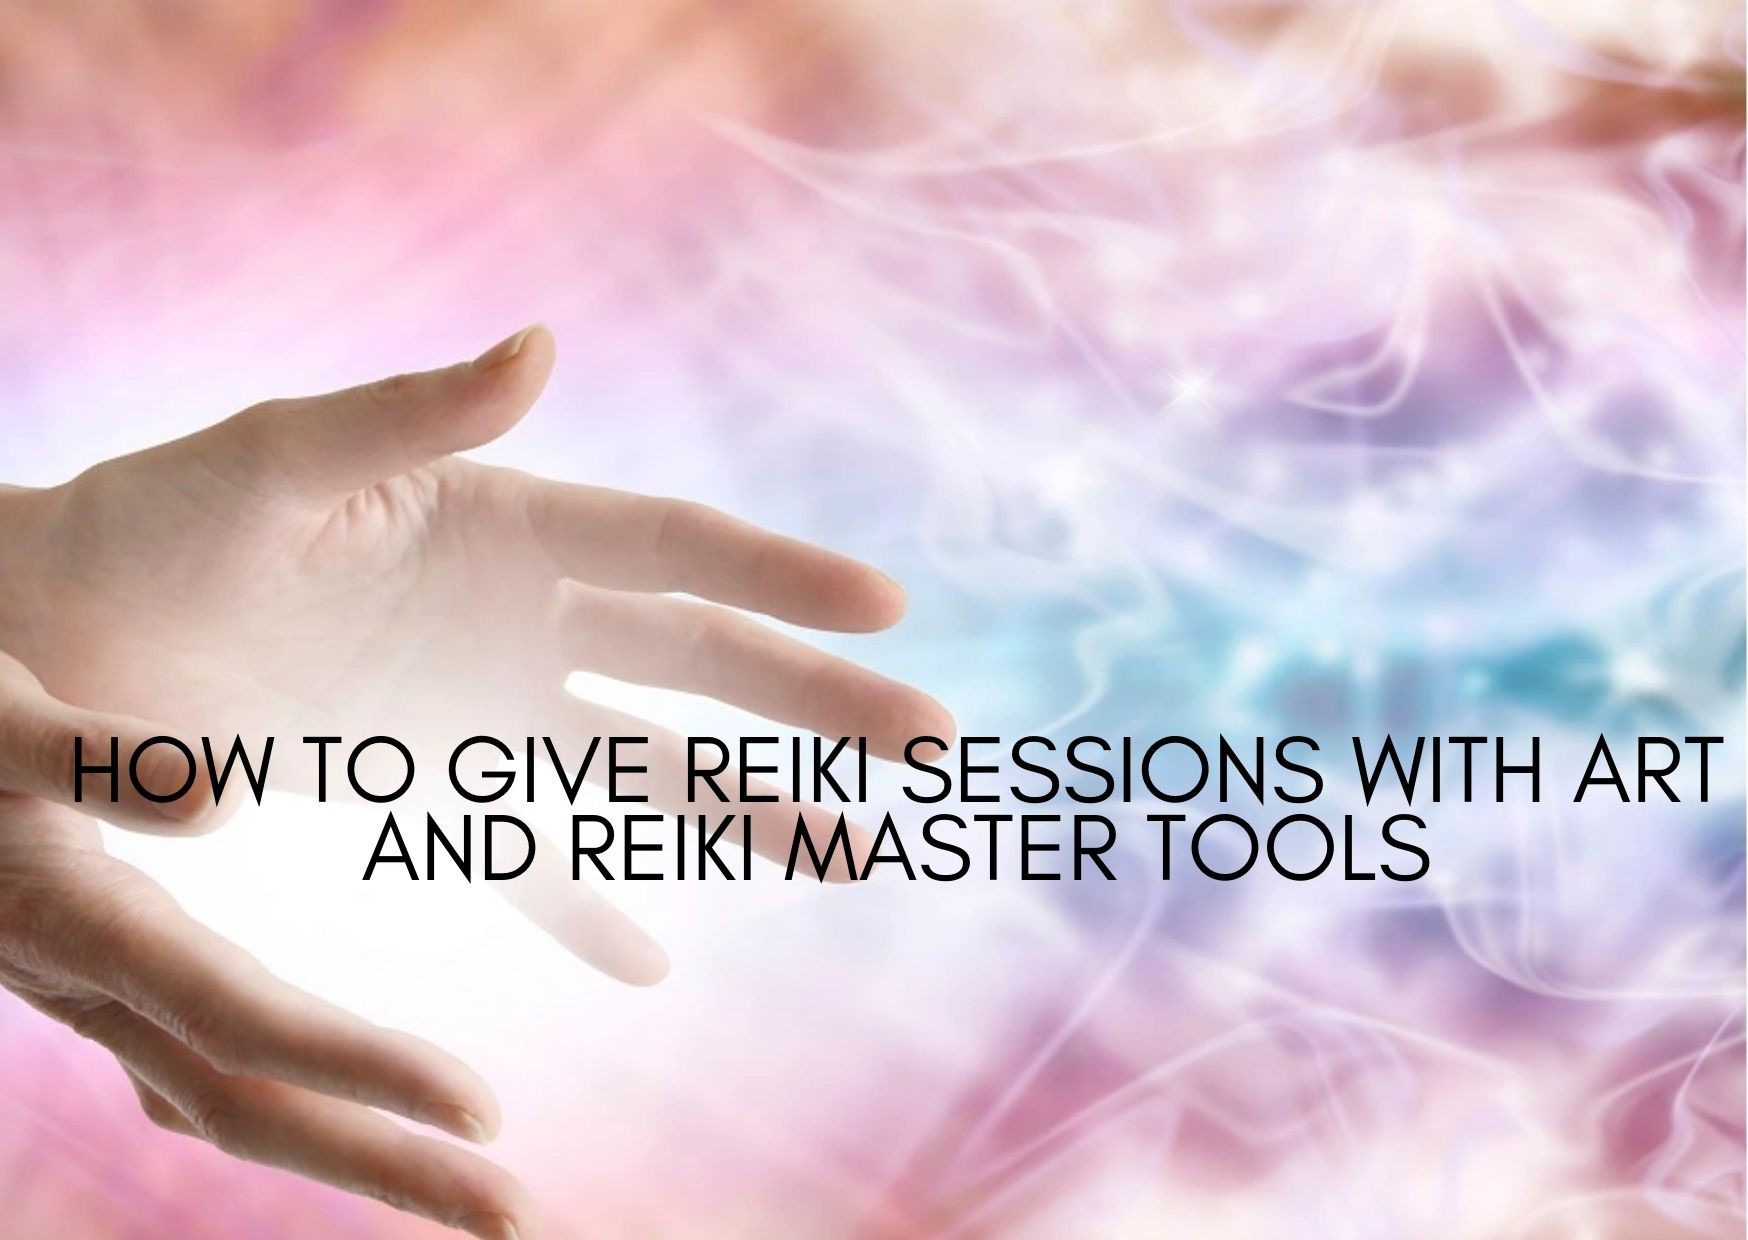 How To Give Reiki Sessions With ART And Reiki Master Tools